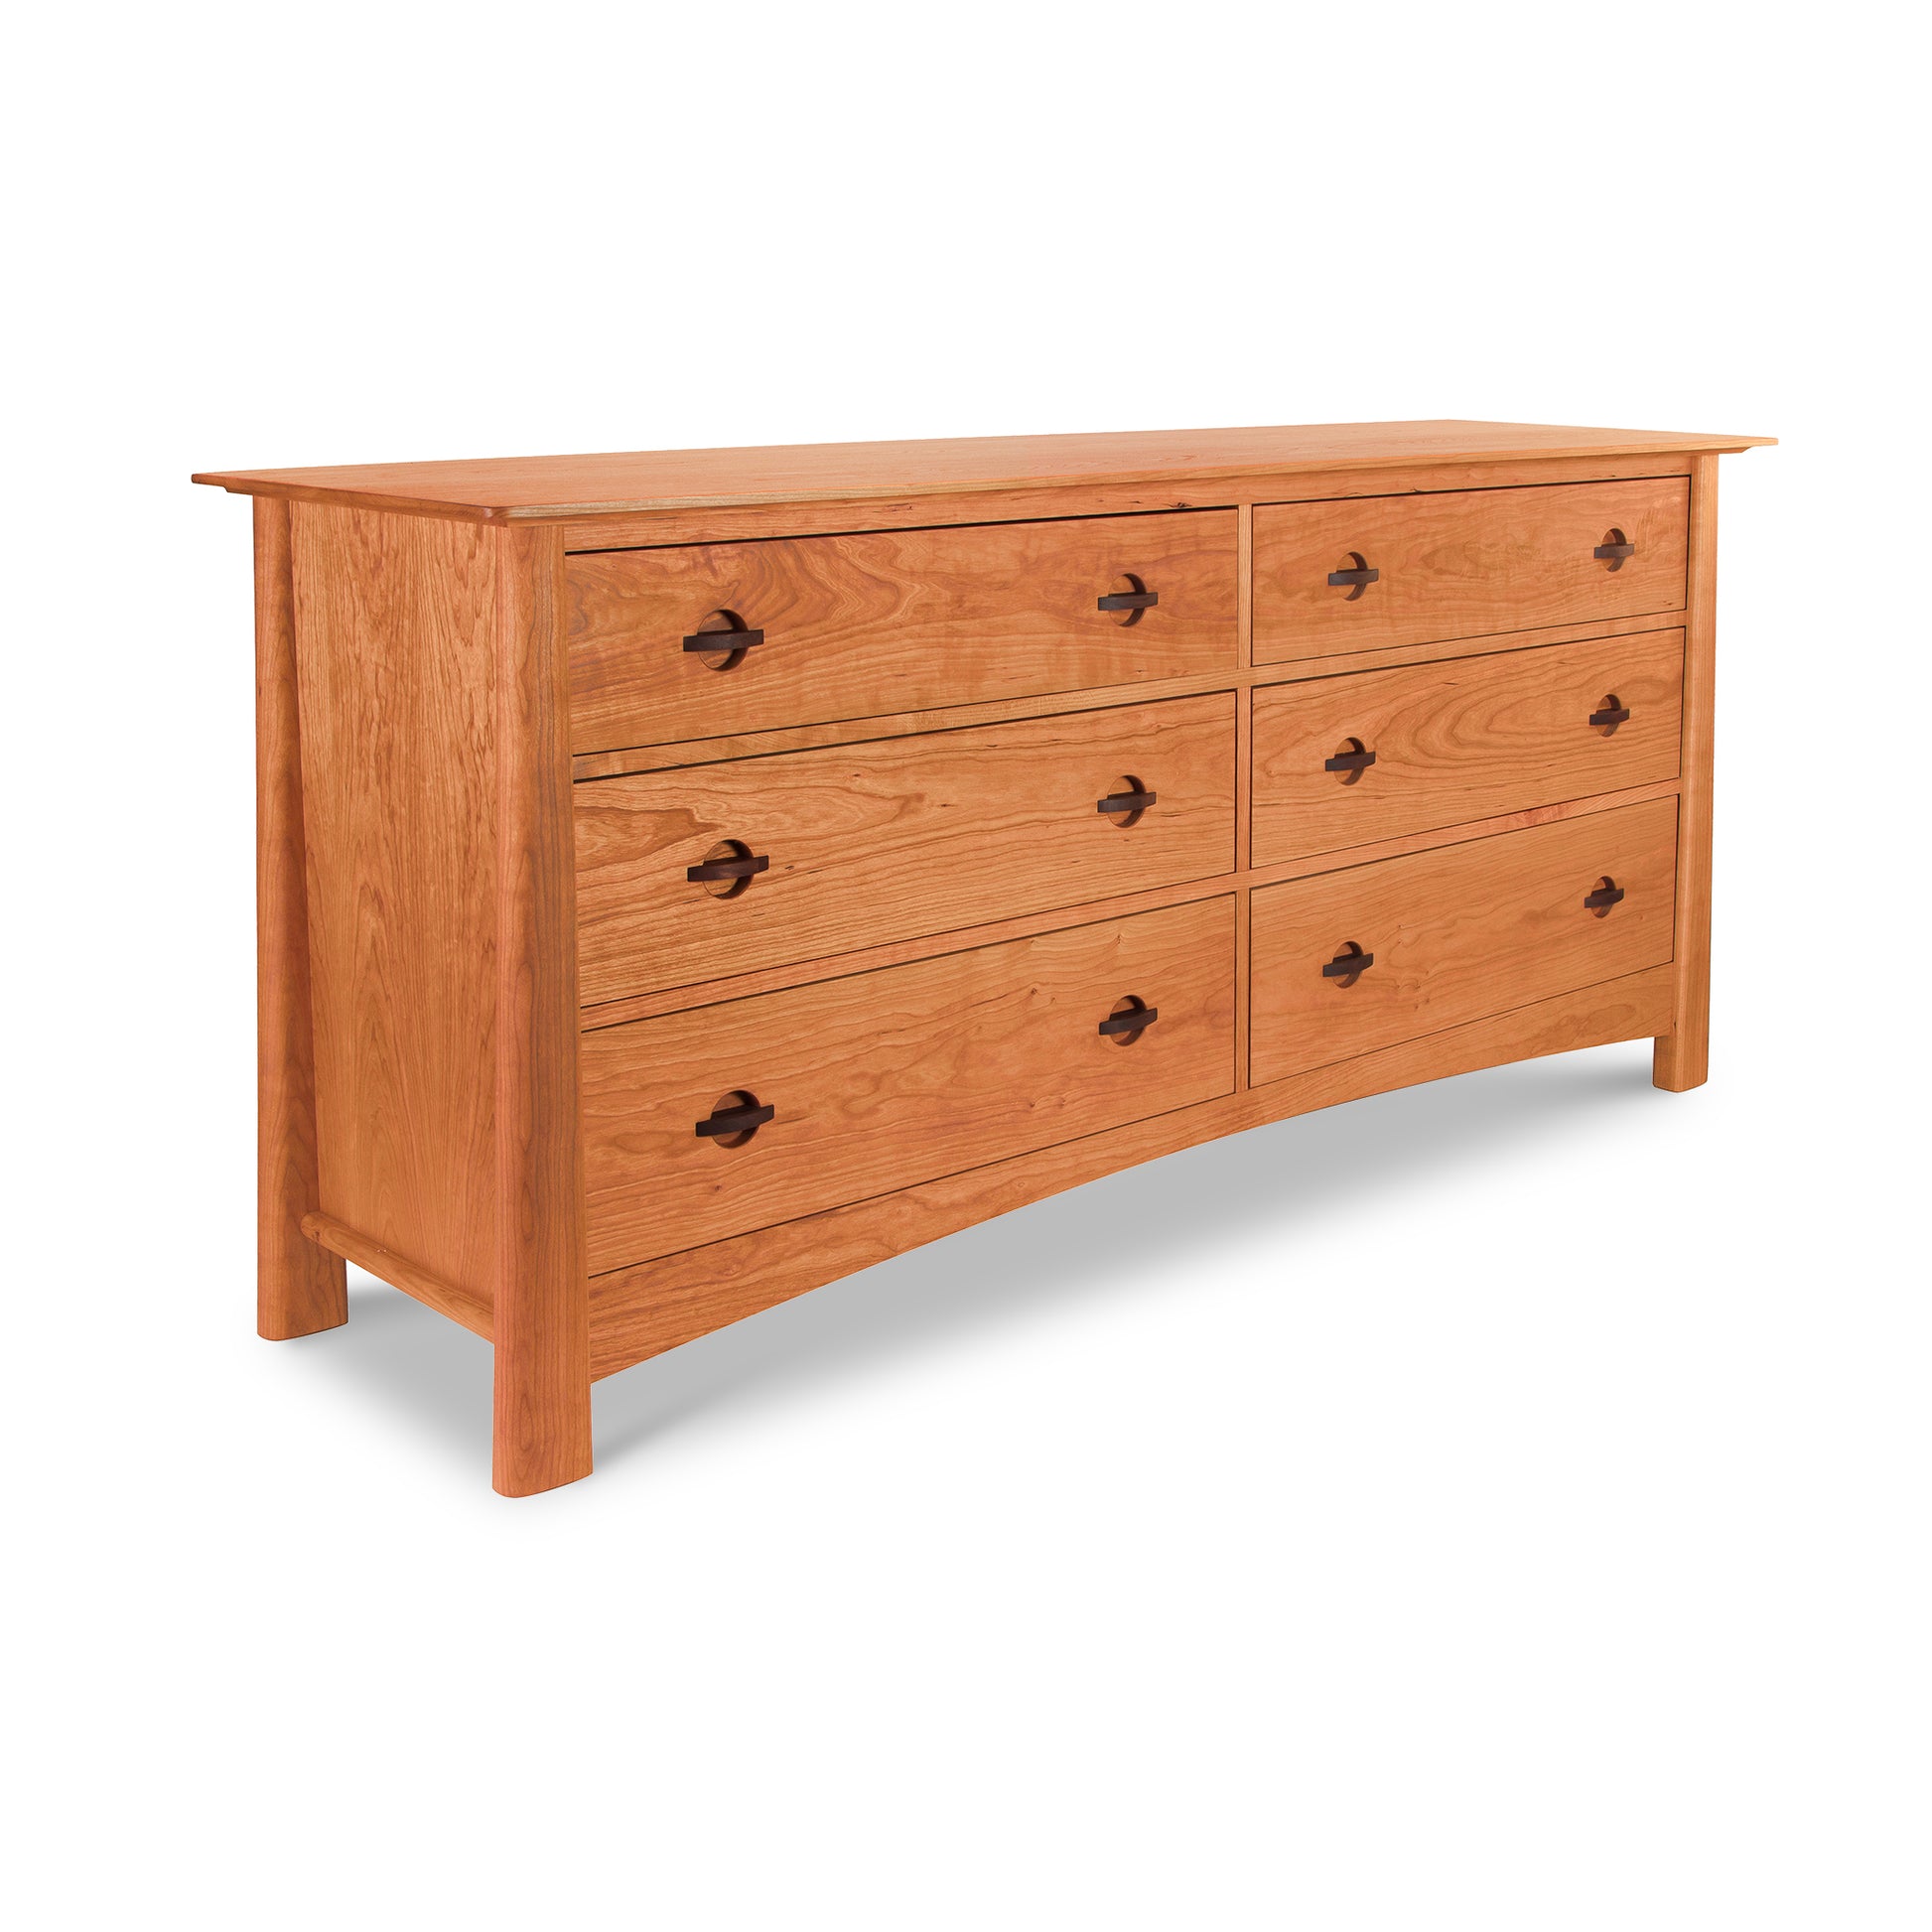 A Maple Corner Woodworks Cherry Moon 6-Drawer Dresser with black handles on a white background.